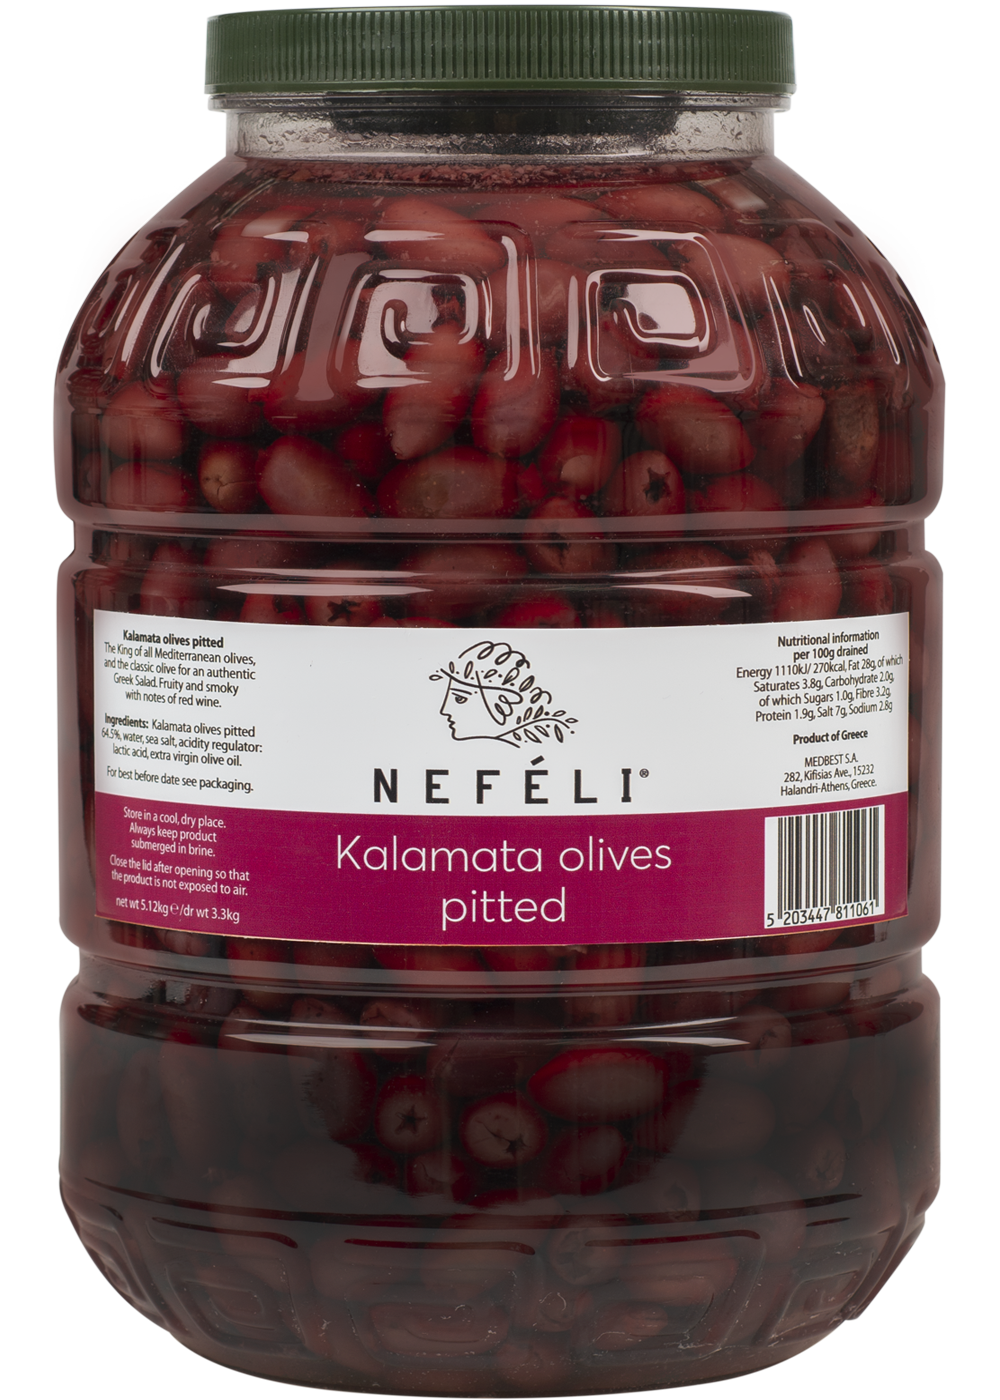 Kalamata olives pitted in in 5kg pet jar